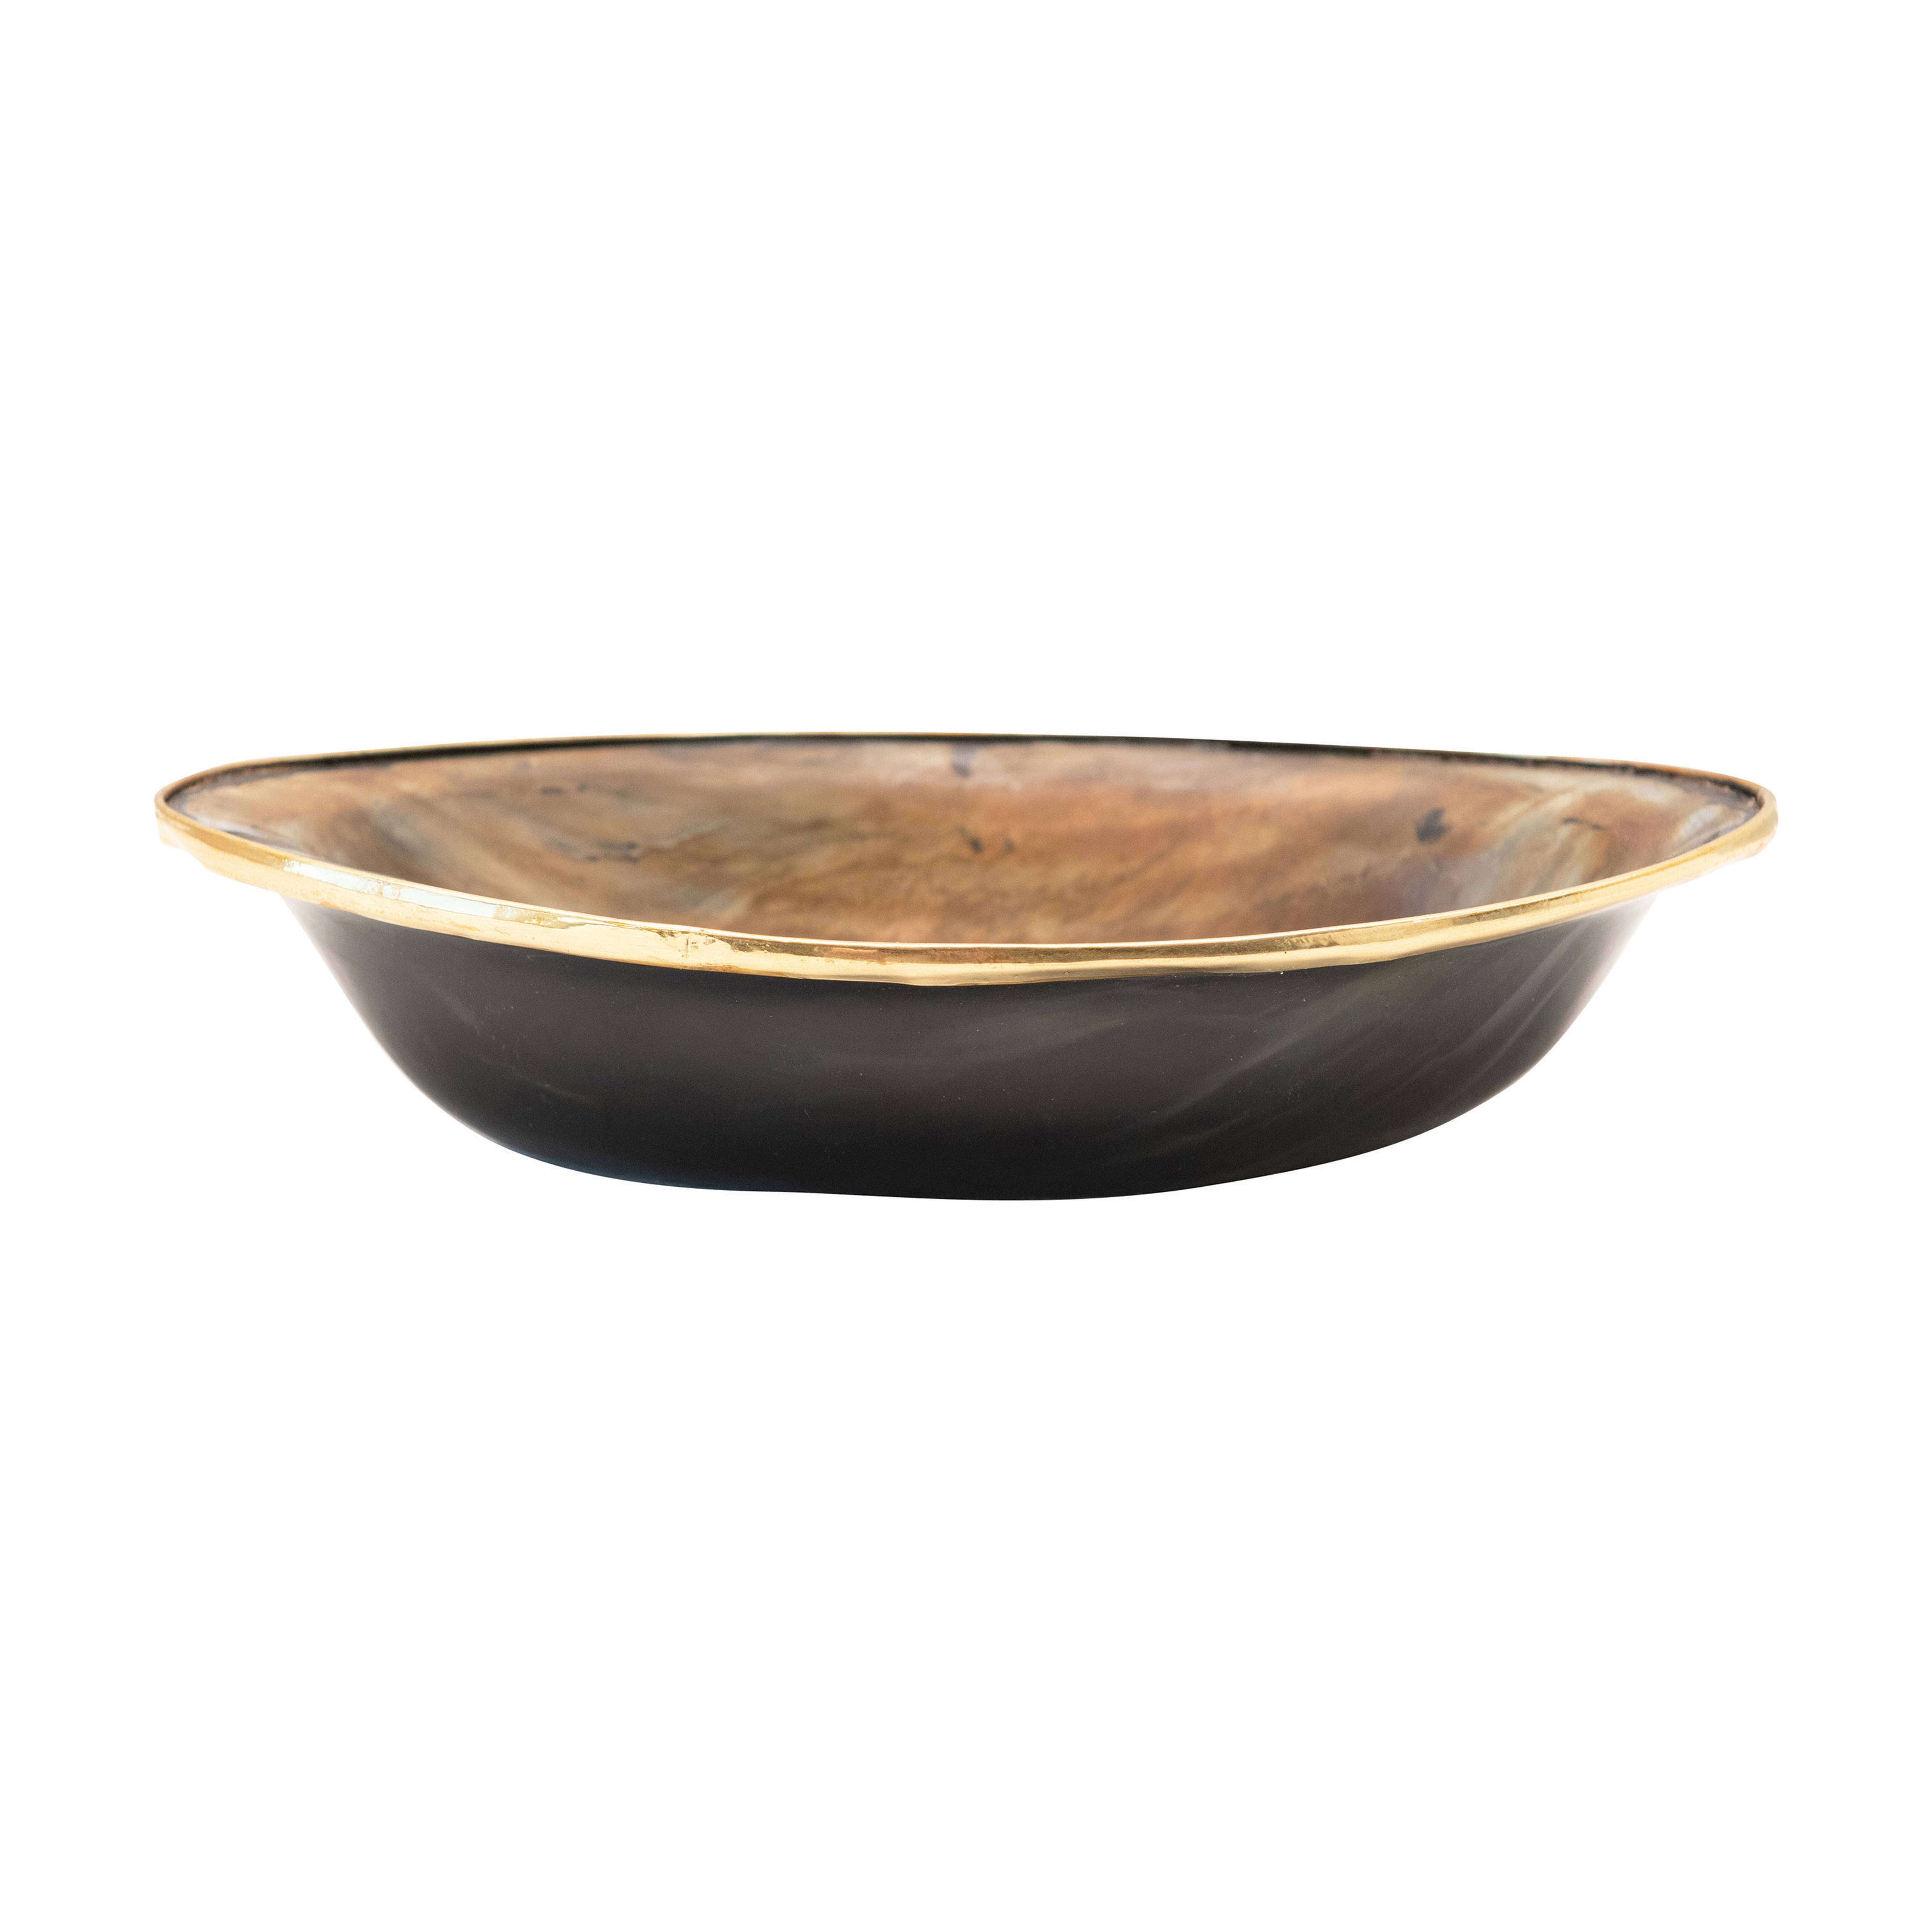 Horn Bowl with Brass Rim (Each One Will Vary) - Nomad Home